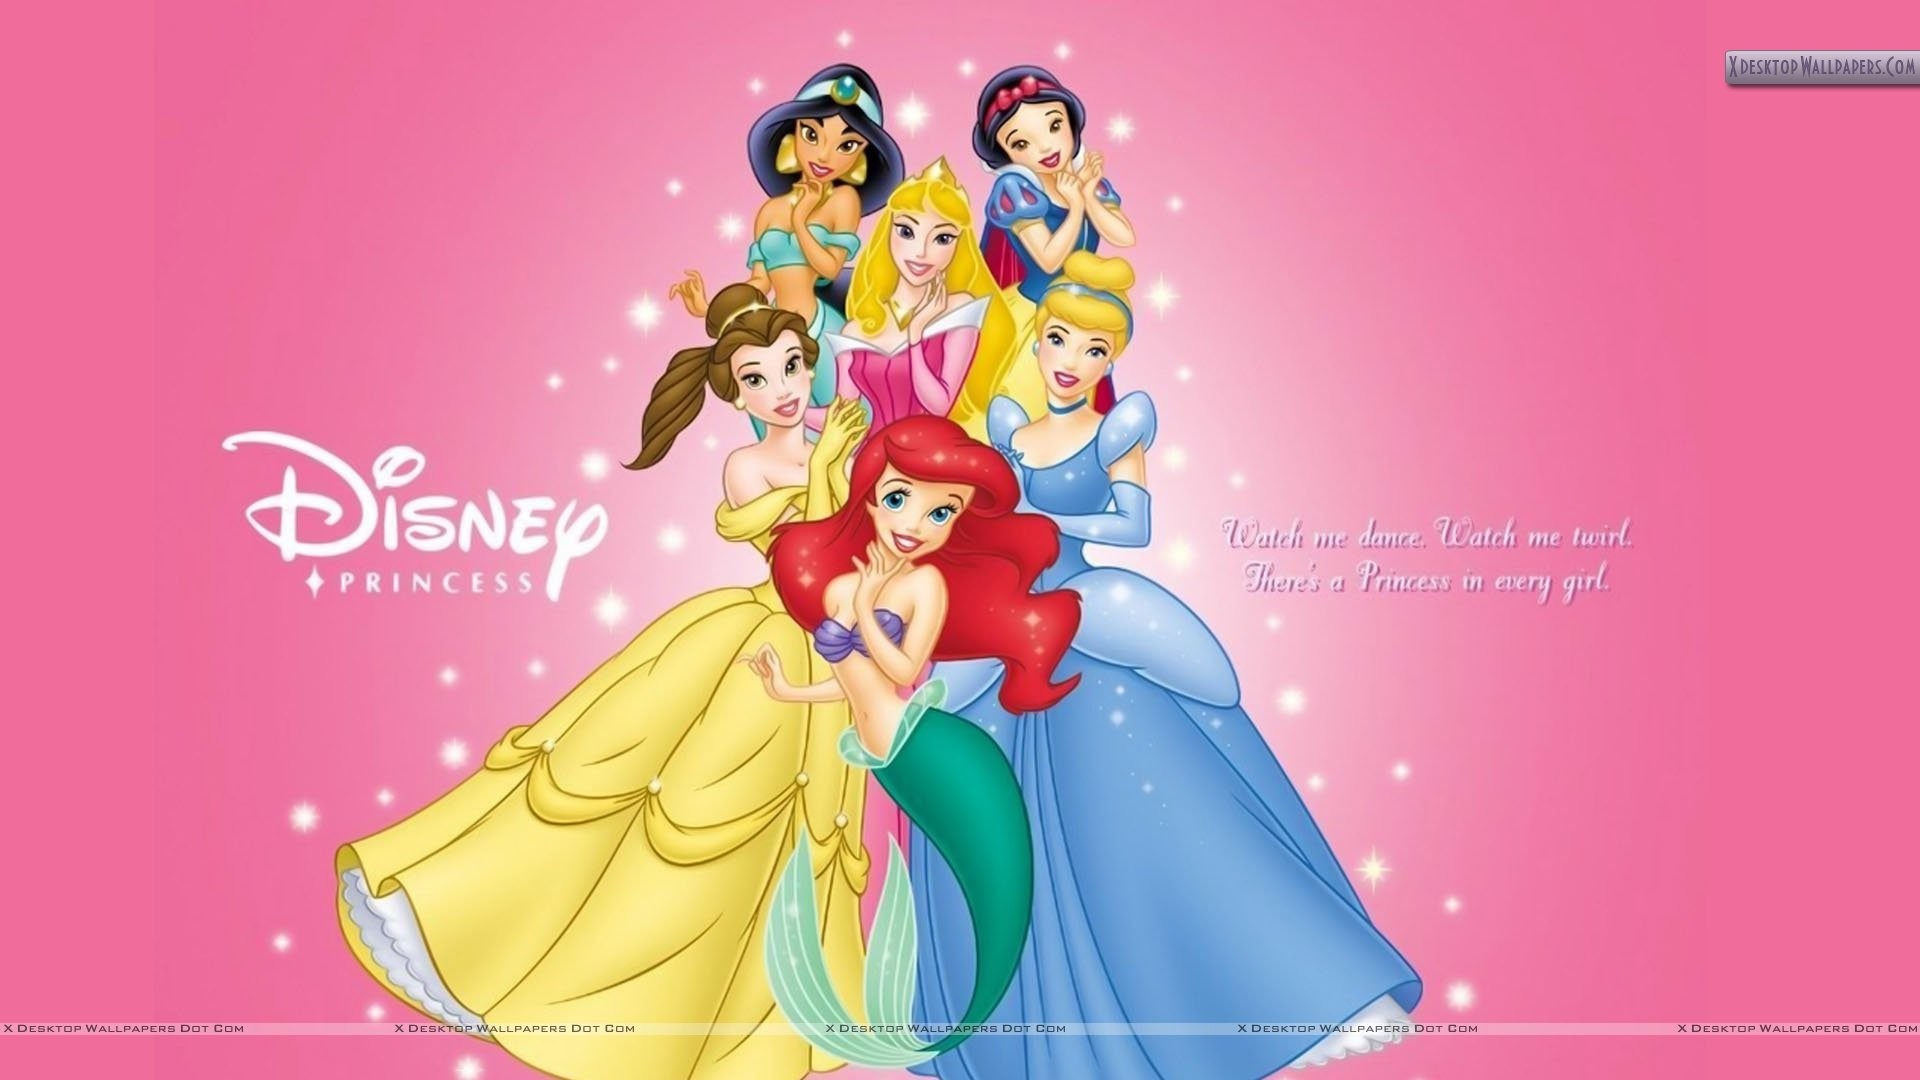 1920x1080 You are viewing wallpaper titled "Disney Princess On Pink Background" ...